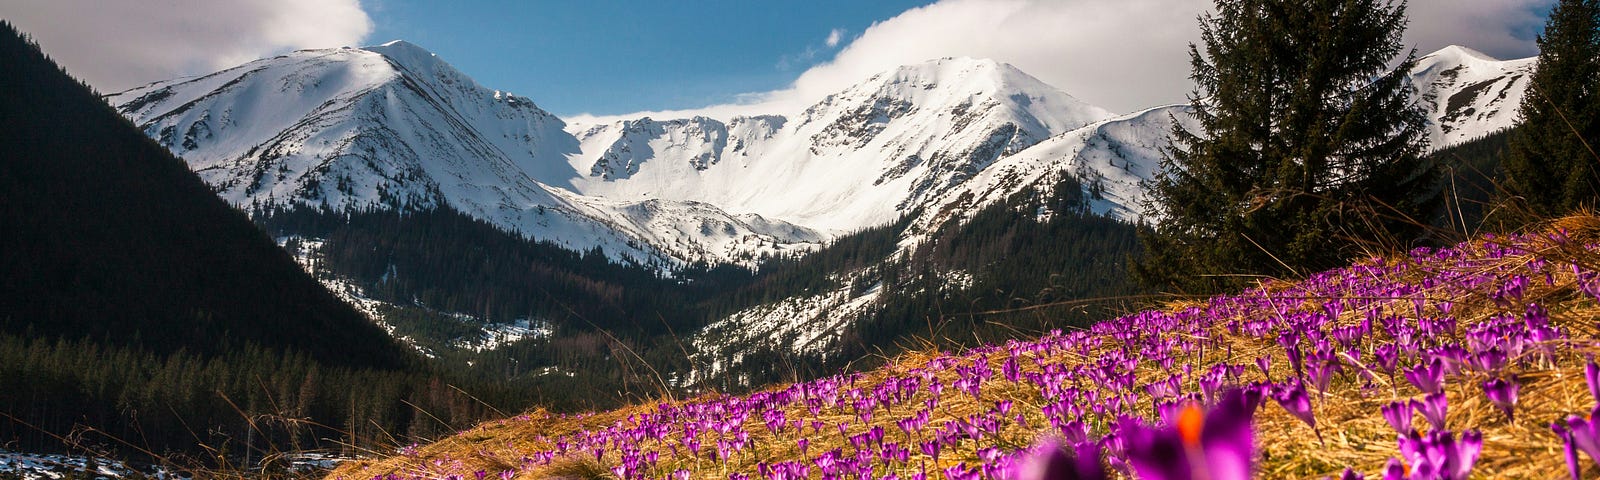 The image depicts a stunning landscape with vibrant purple crocus flowers in the foreground and snow-capped mountains in the background. The contrast between the colorful flowers and the white snow creates a striking and beautiful scene. It appears to be a high-altitude area, possibly during springtime when the snow is melting, and the flowers are in bloom. The clear blue sky and evergreen trees add to the picturesque nature of the setting.